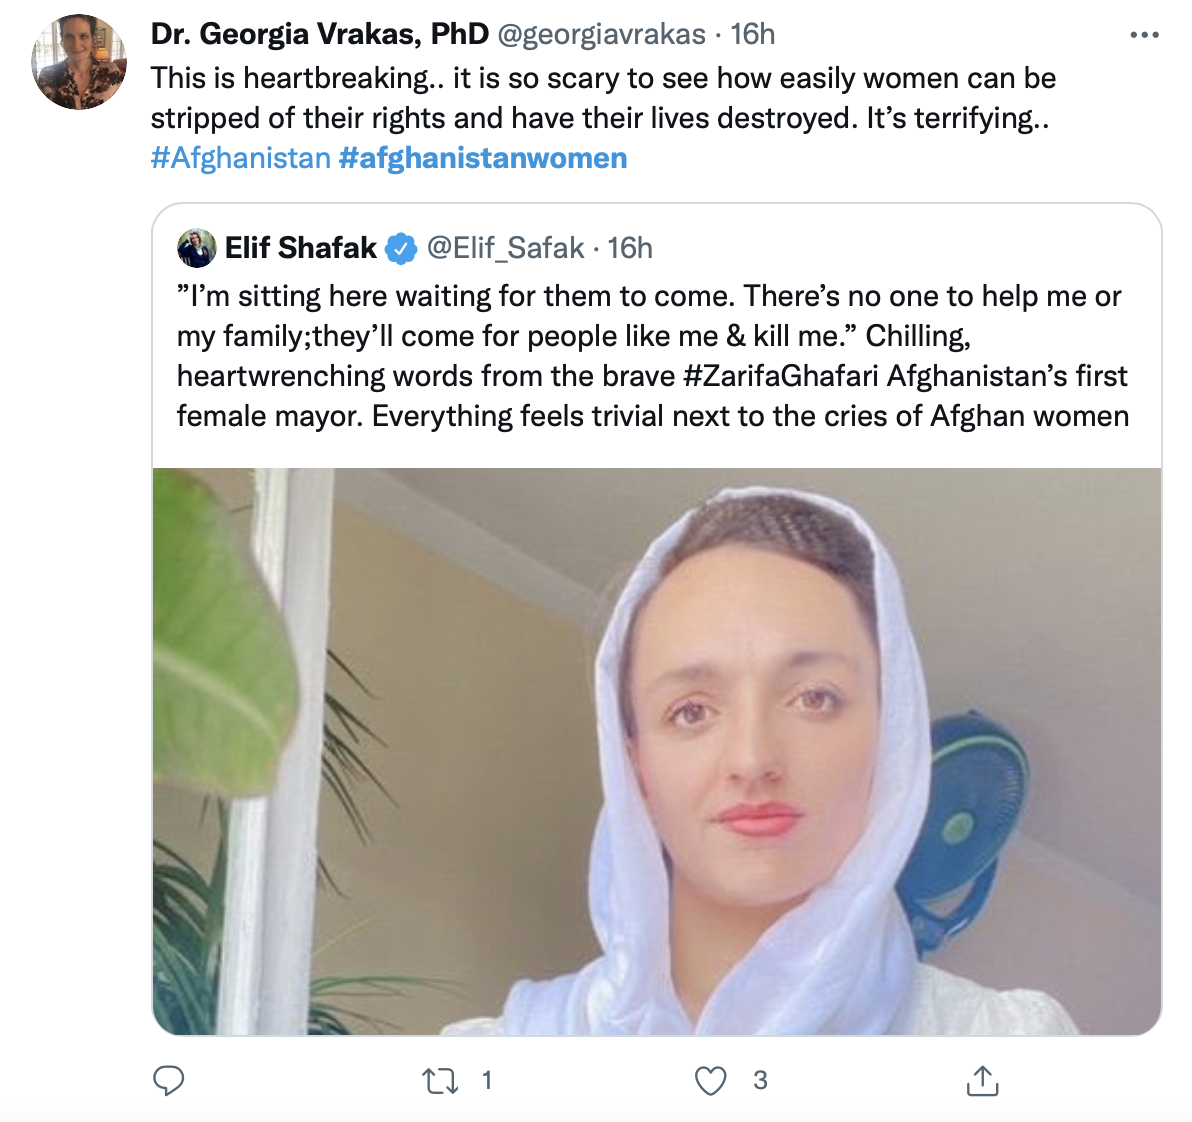 Afghan Woman Rights